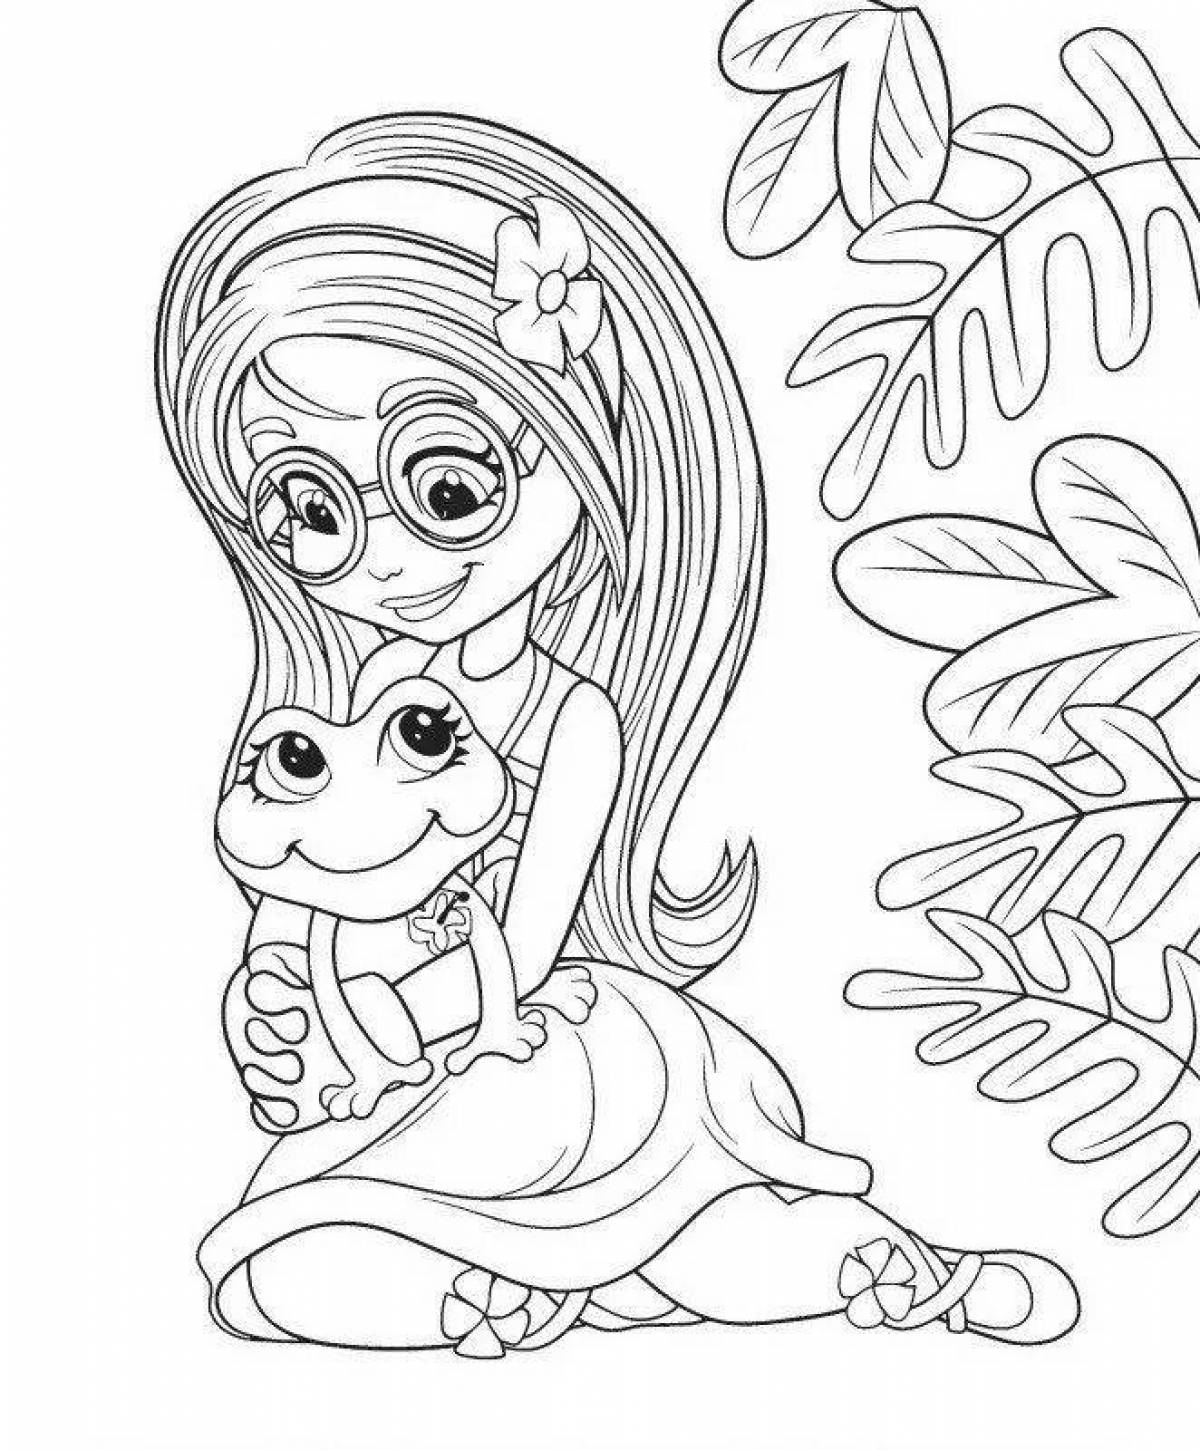 Enchantimols coloring page is exciting